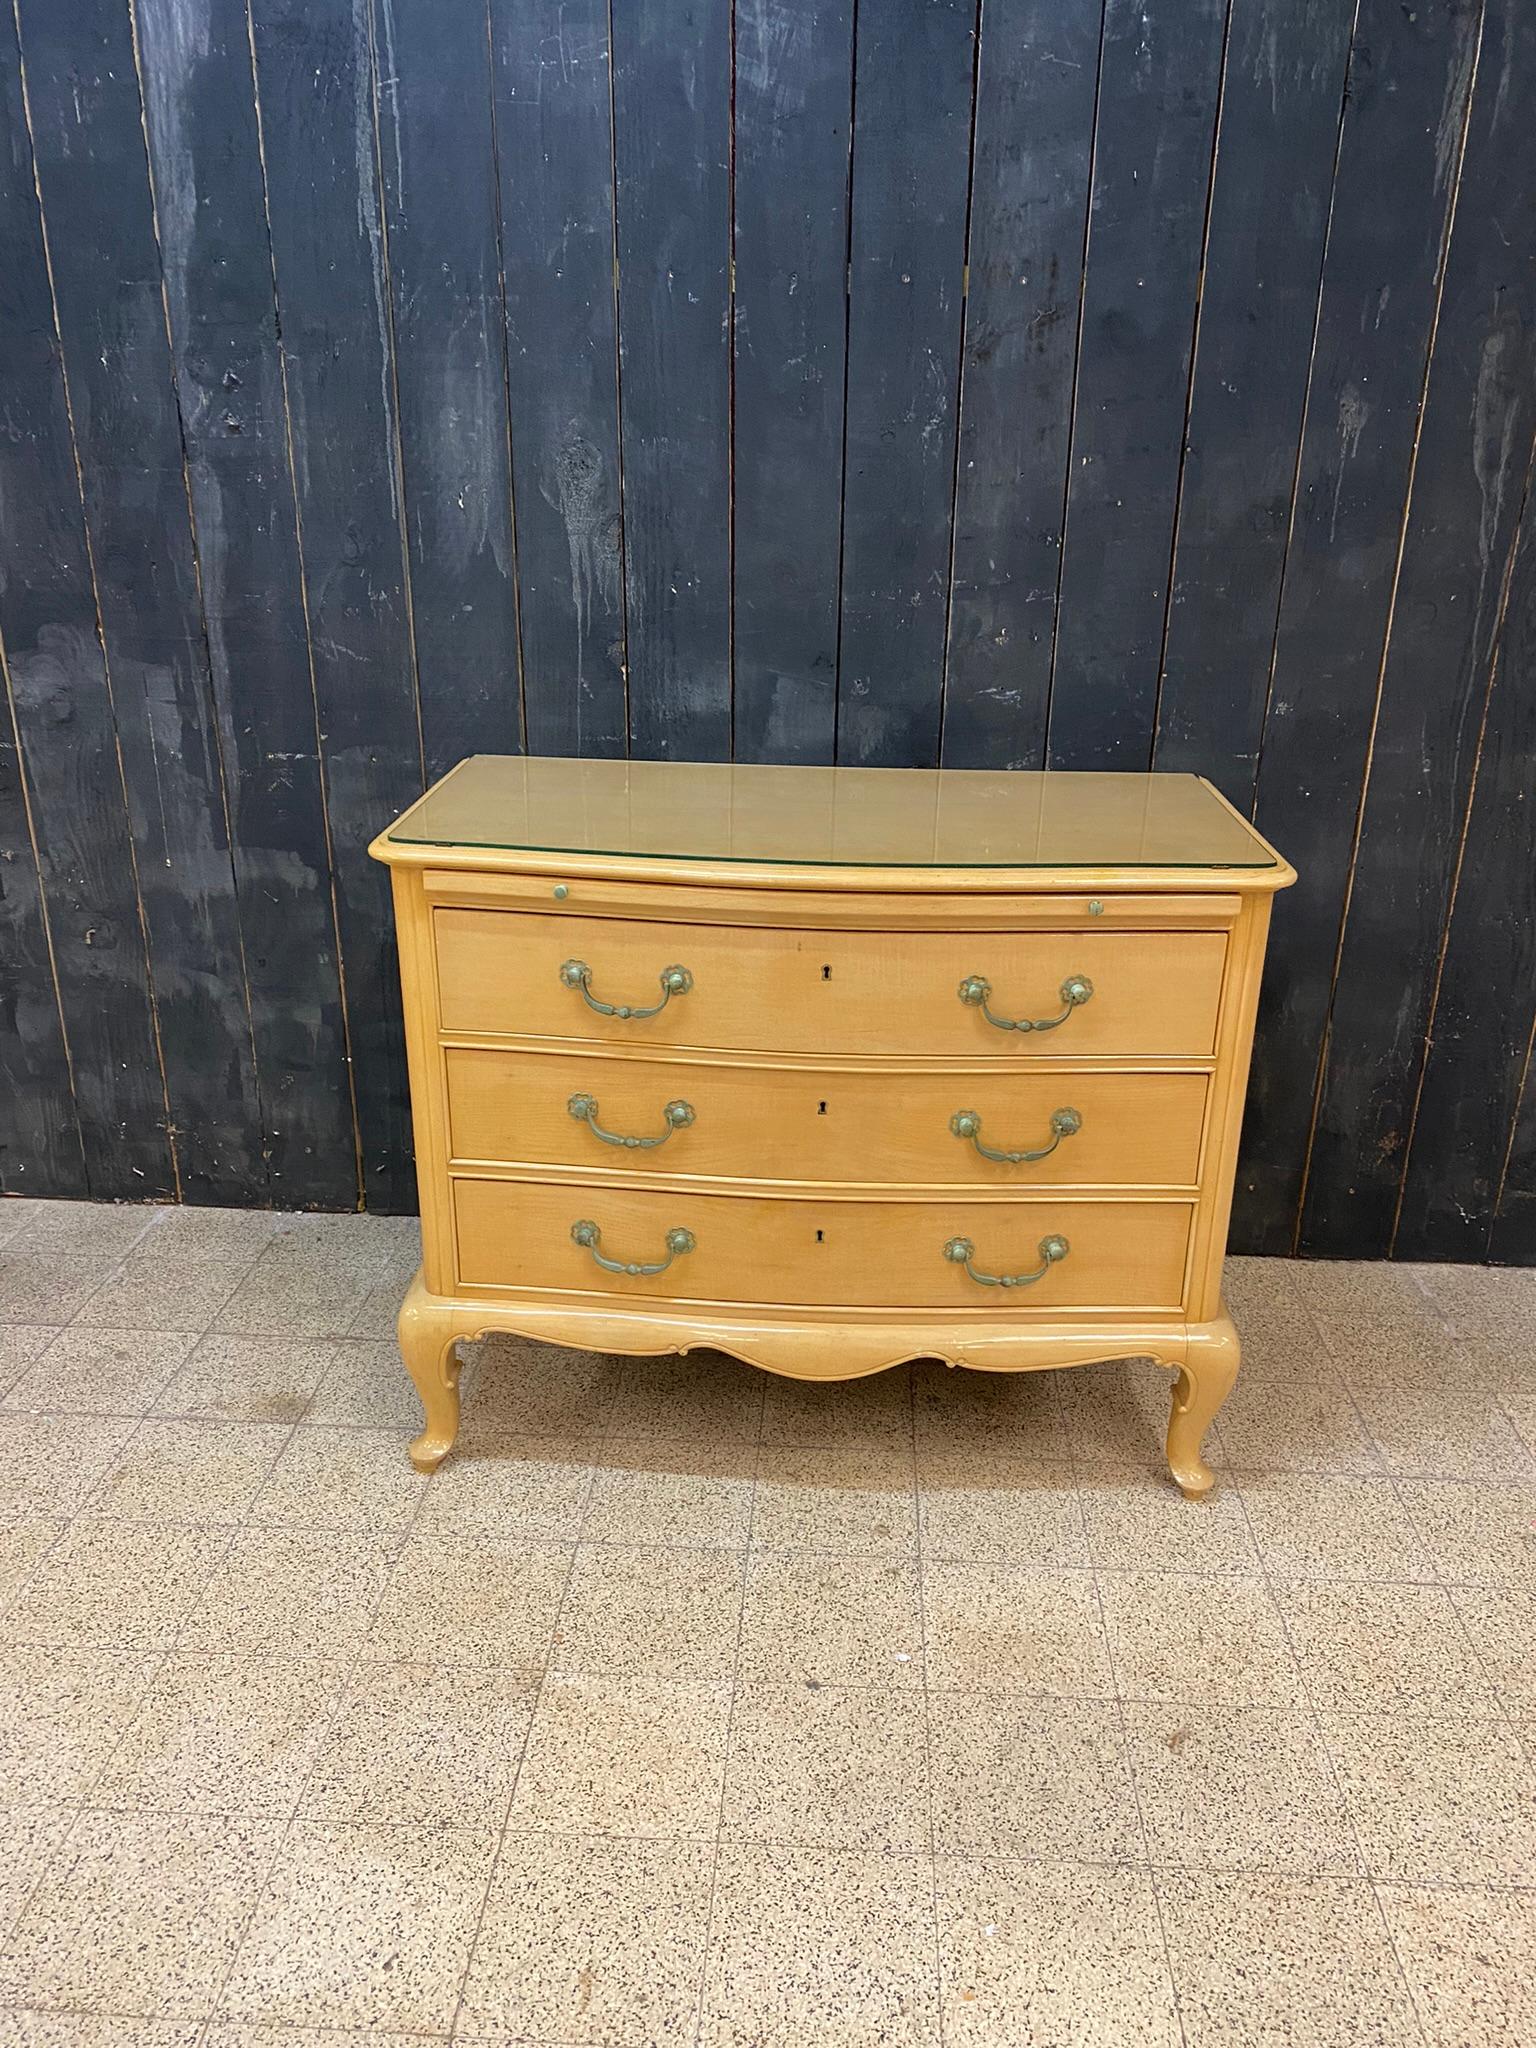 Art Deco Neo-Classical Chest of Drawers in Sycamore and Patinated Bronze, circa 1940/1950 For Sale